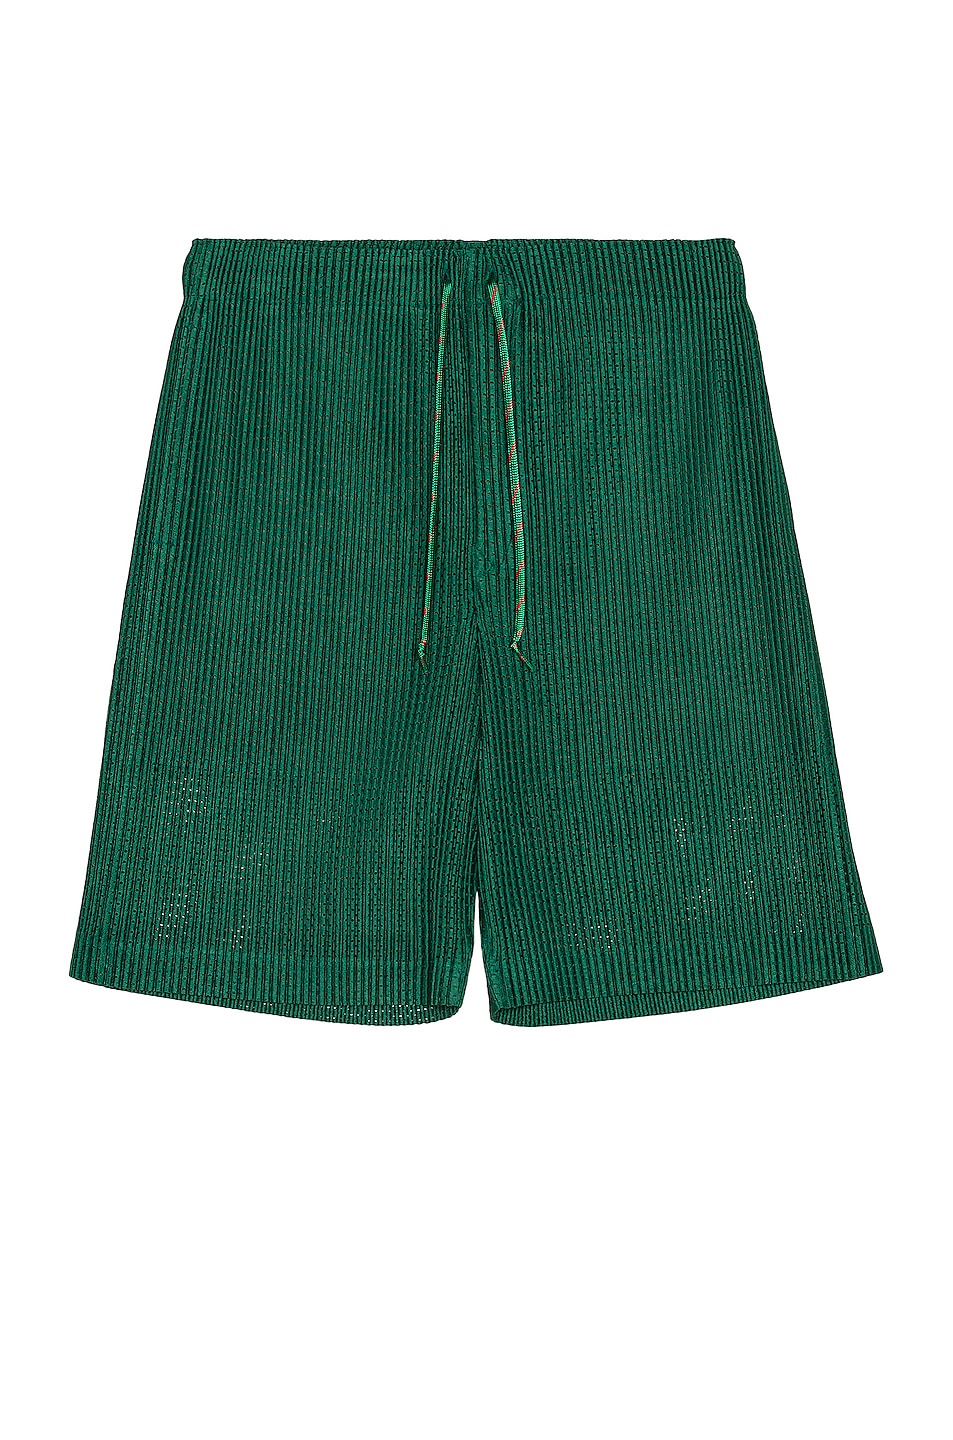 Image 1 of Homme Plisse Issey Miyake Shorts in Green